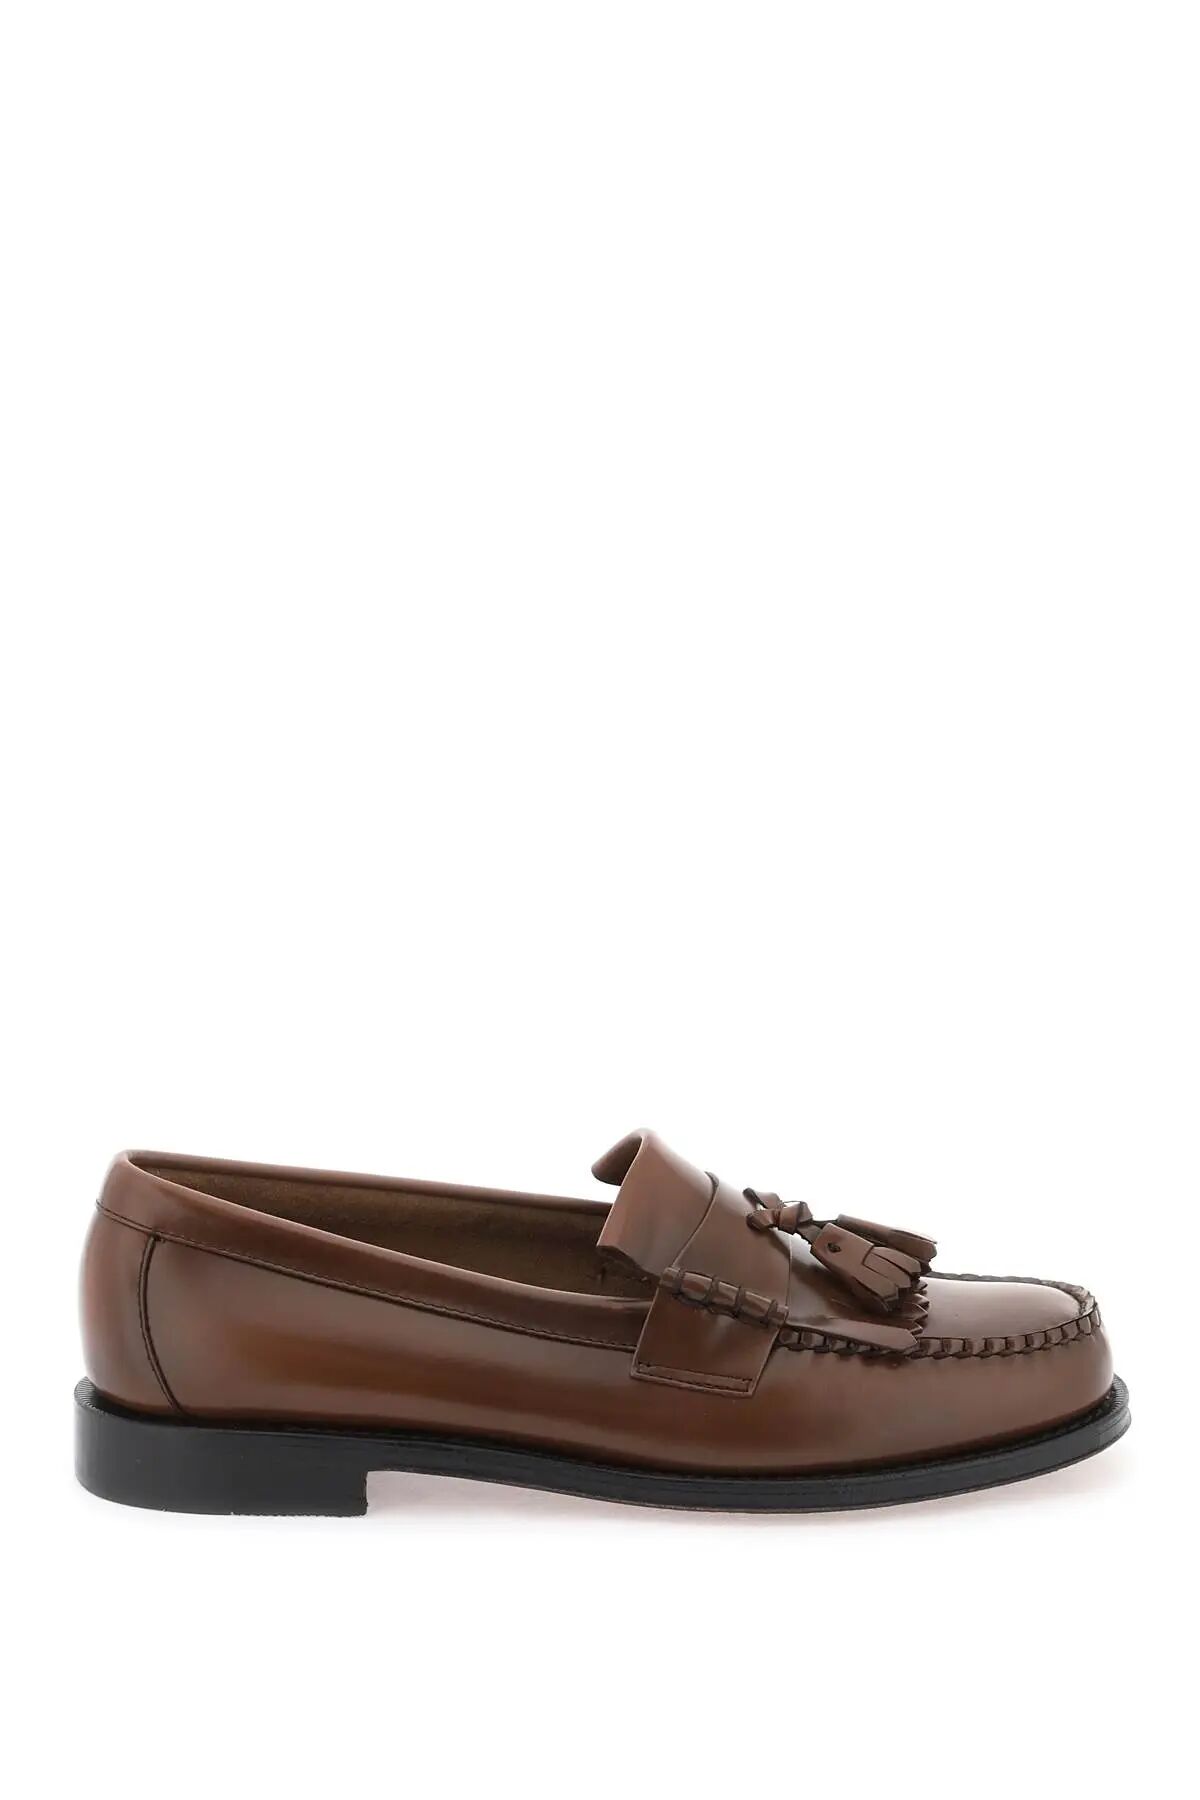 G.H. BASS Esther Kiltie Weejuns loafers  - Brown - male - Size: 45